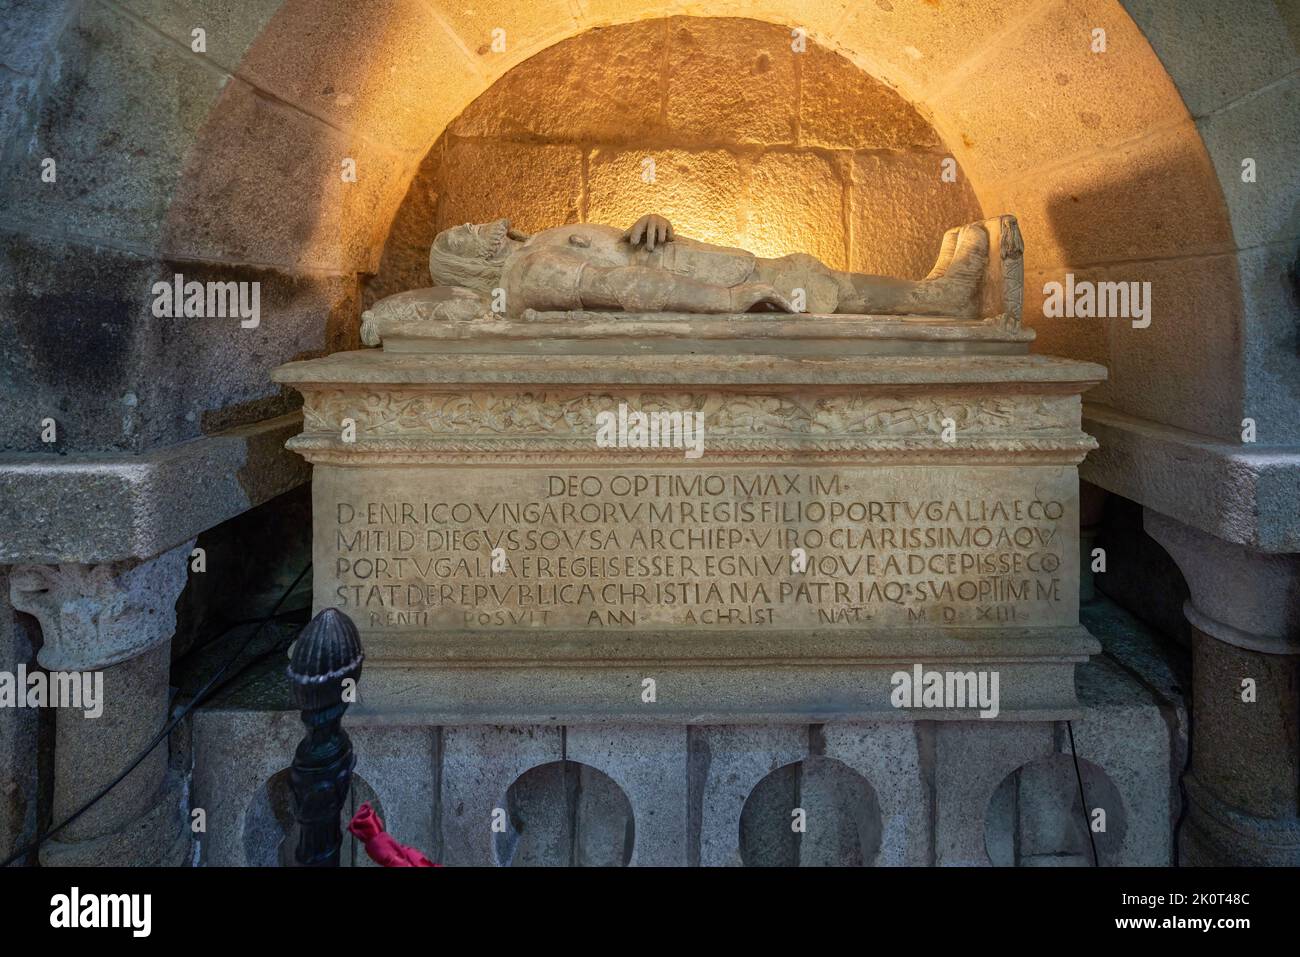 Tomb of Count Henry - father of the first king of Portugal D. Afonso Henriques in Chapel of the Kings at Sé de Braga - Braga, Portugal Stock Photo